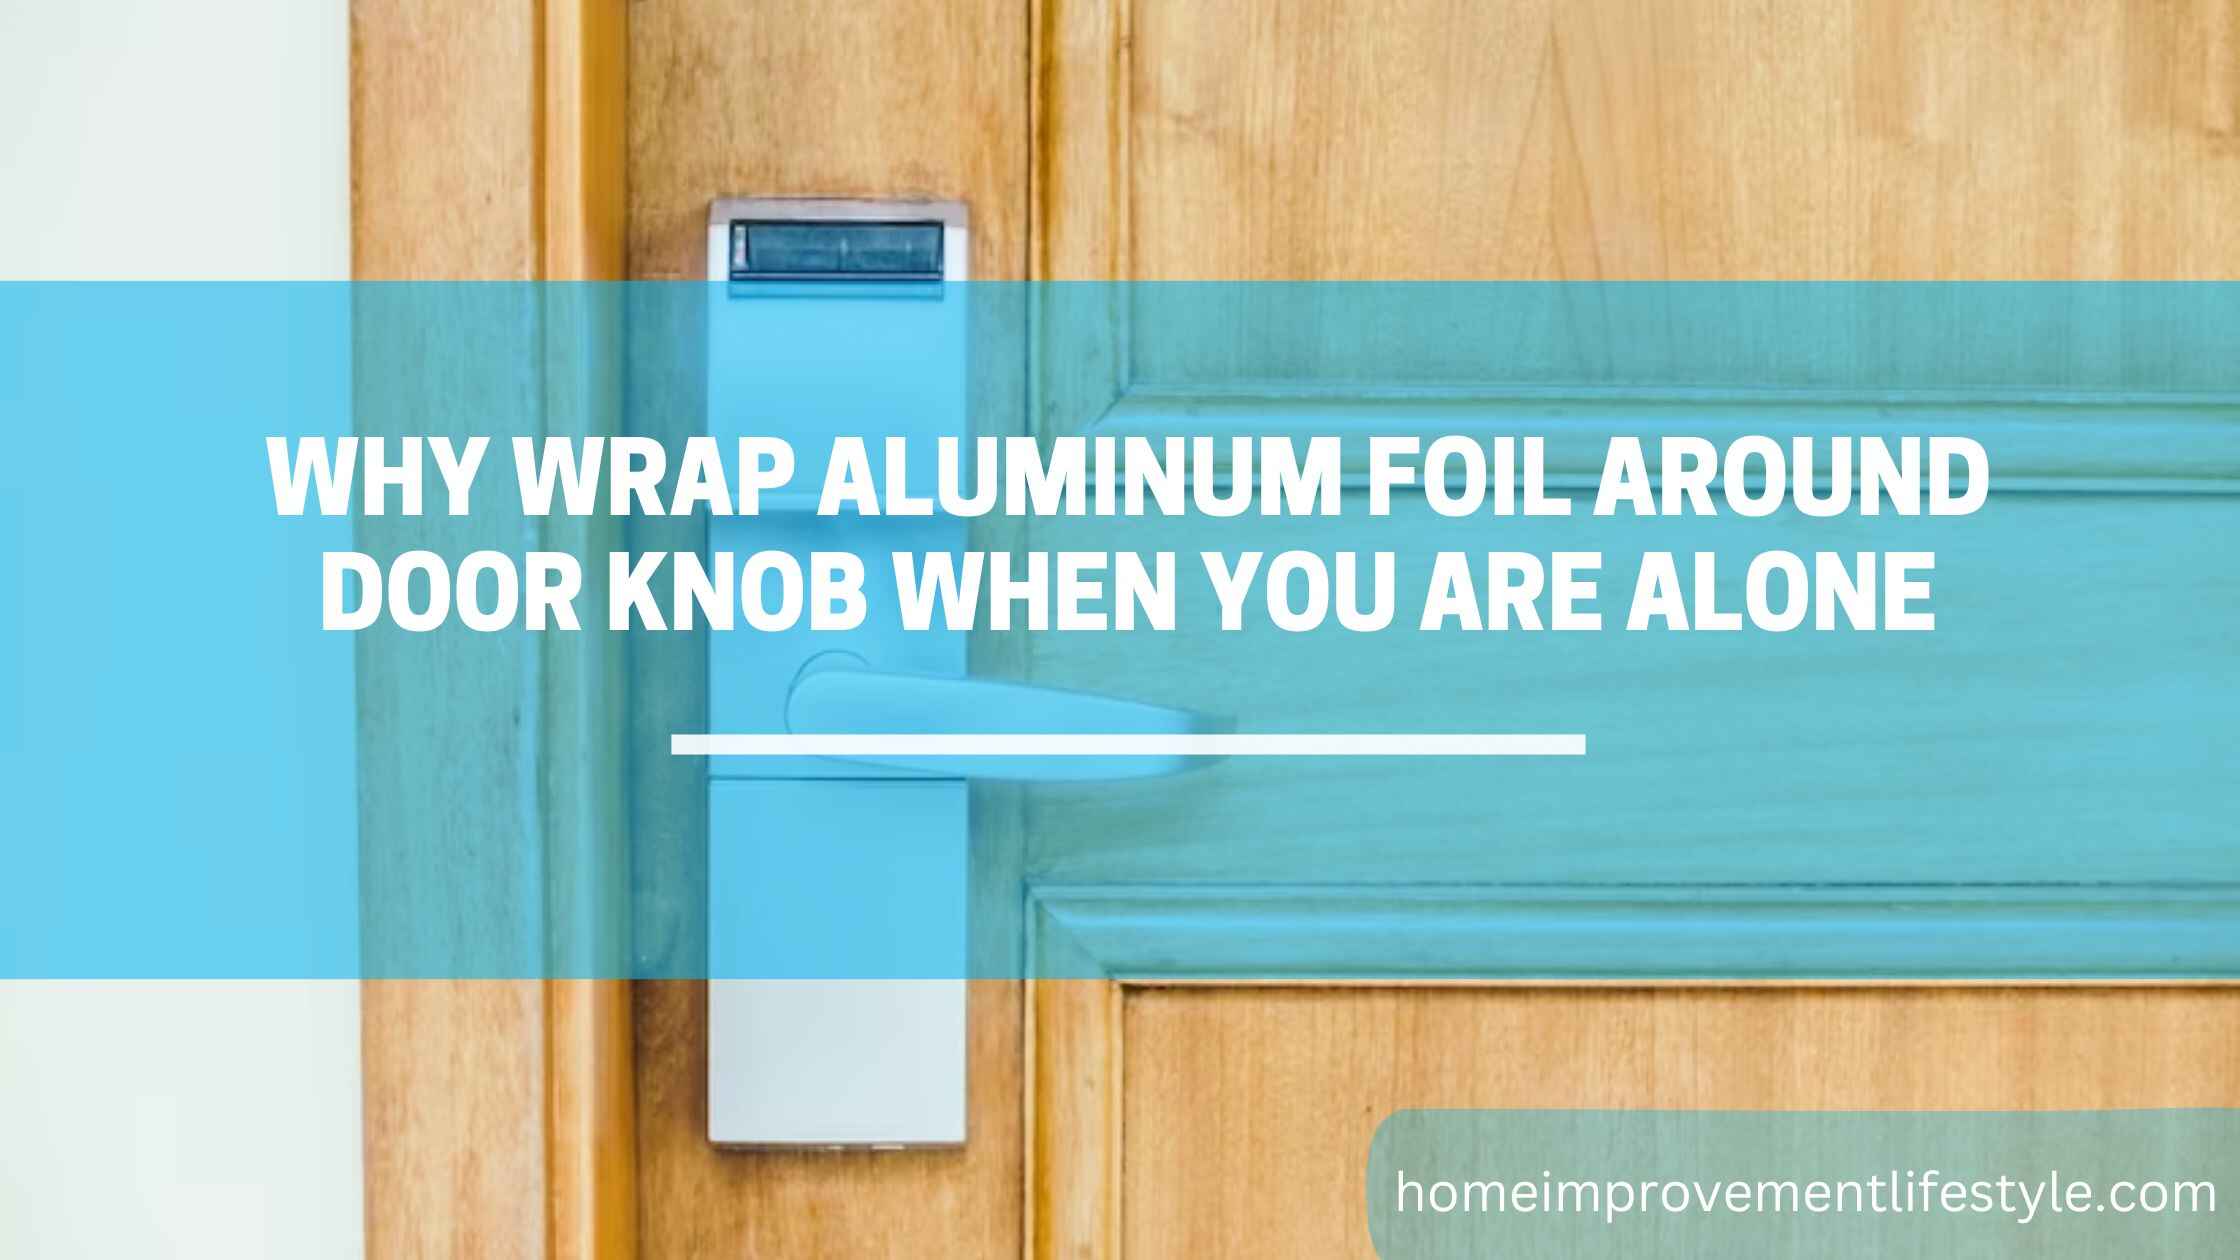 Why Wrap Aluminum Foil Around Door Knob When You are Alone